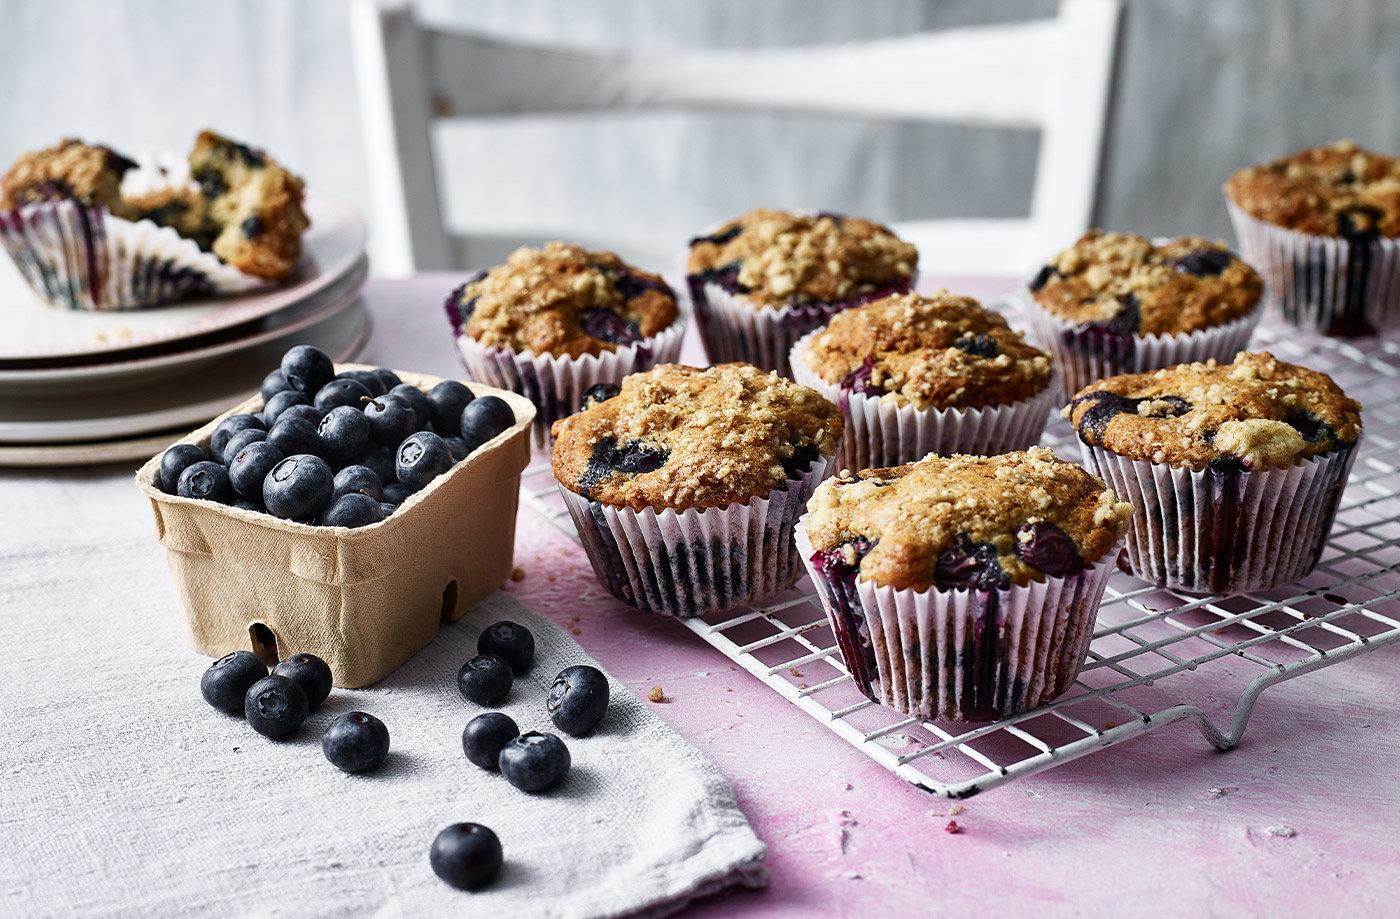 Low-Fat Blueberry Muffins with Crumb Topping